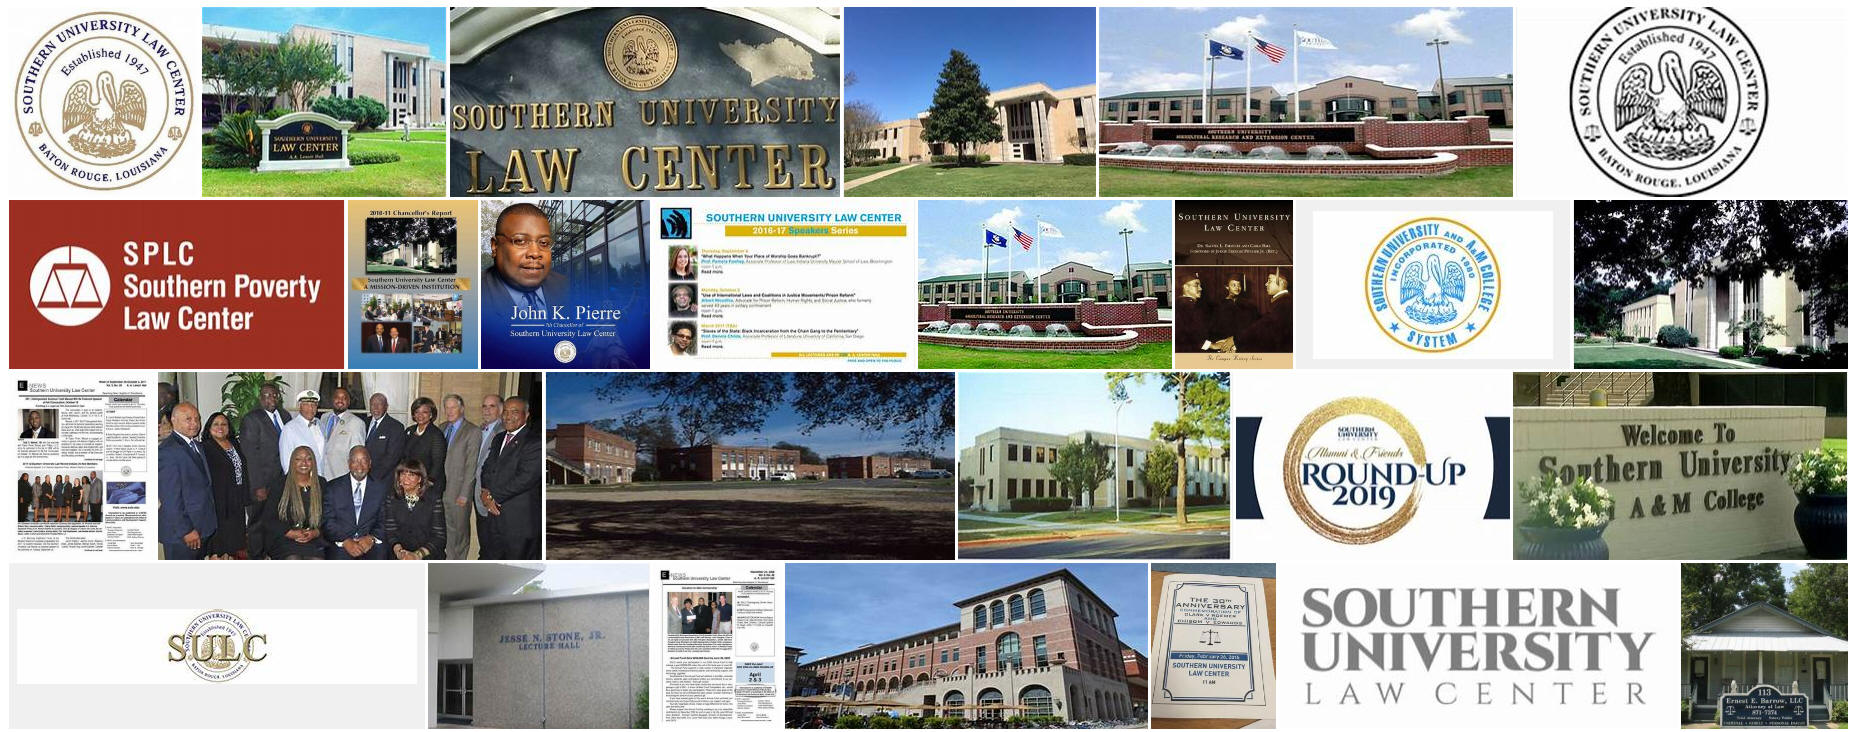 Southern University Law Center Ranking, Tuition Cost, Average LSAT Scores,  GPA, Acceptance Rate